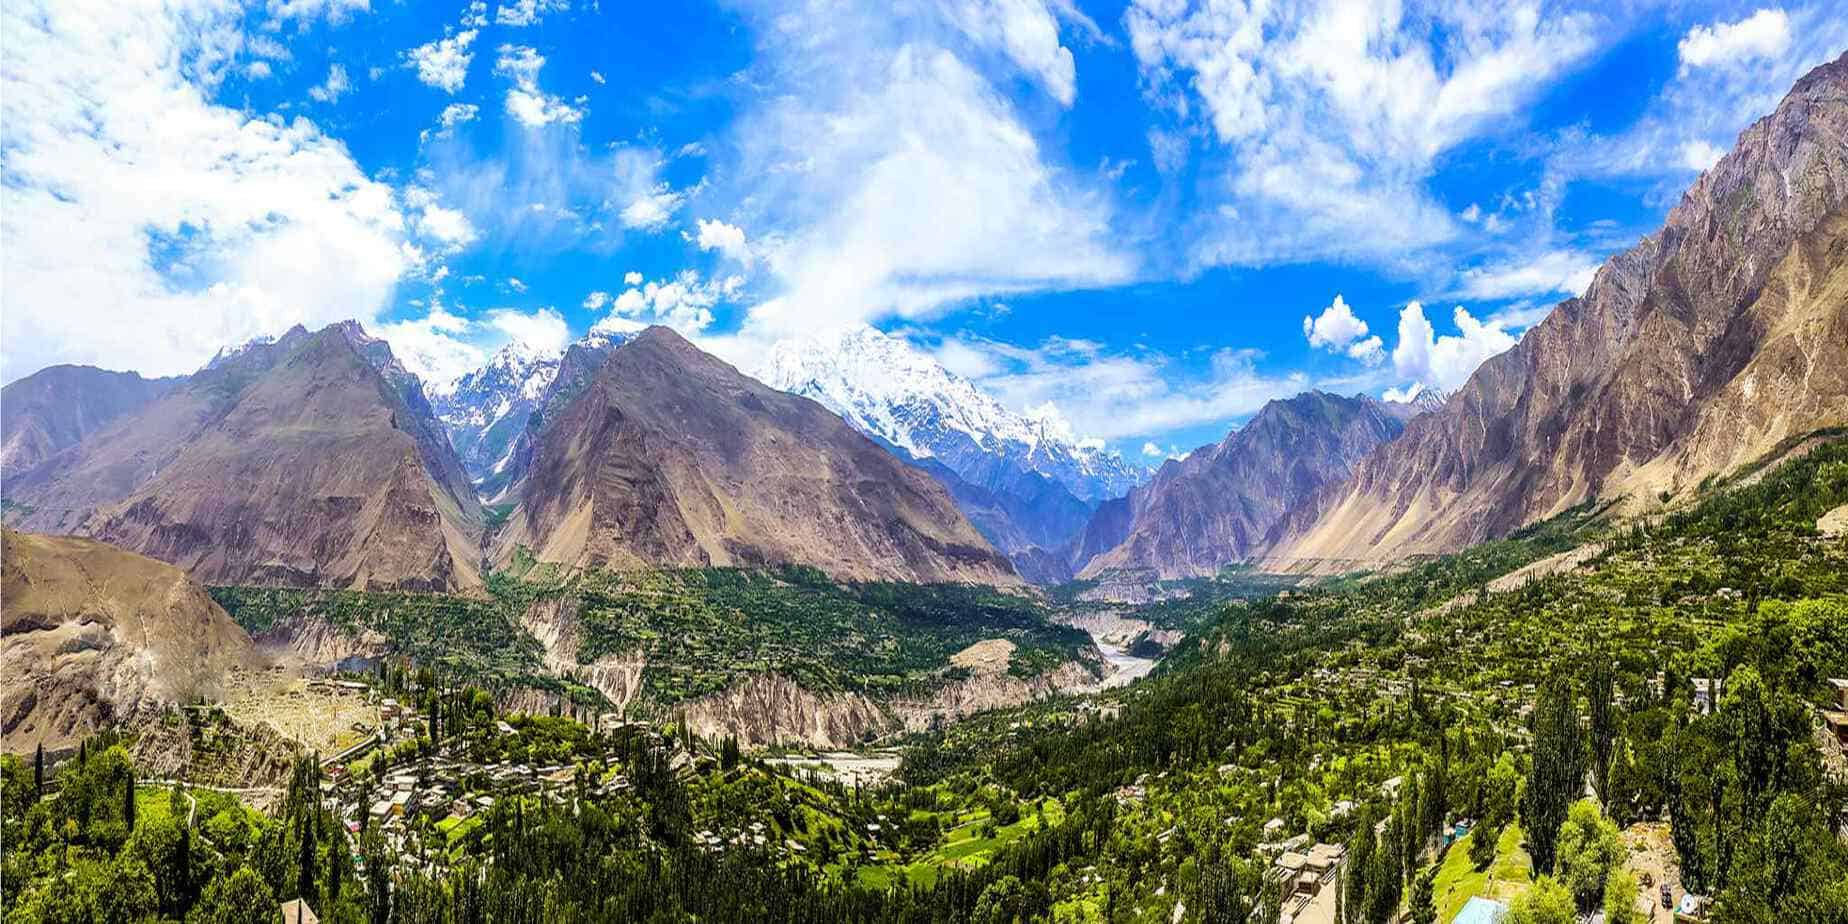 Hunza – A Must-Visit Destination for Adventure Seekers and Nature Lovers